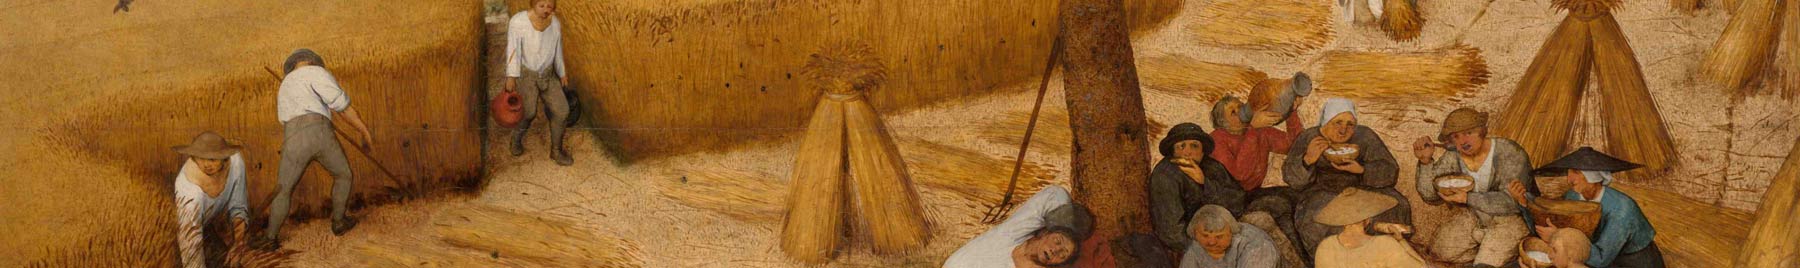 Detail from Bruegel's painting The Harvesters.